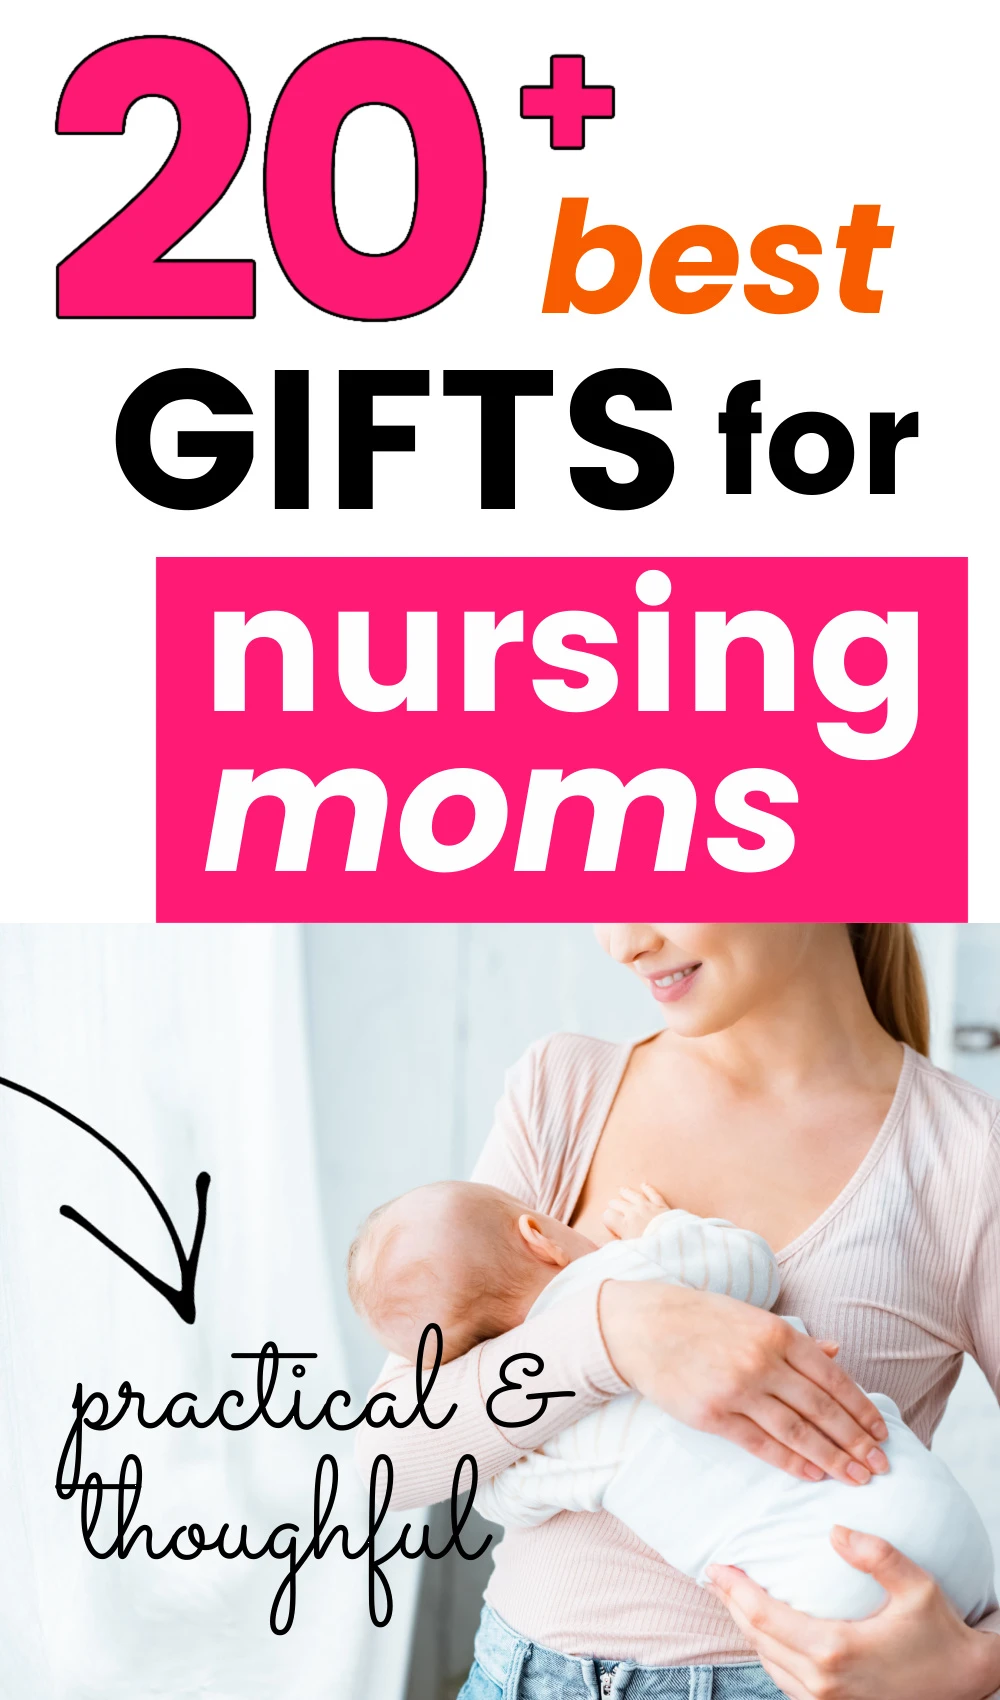 image of breastfeeding mom, with text overlay "20+ best gifts for nursing moms".